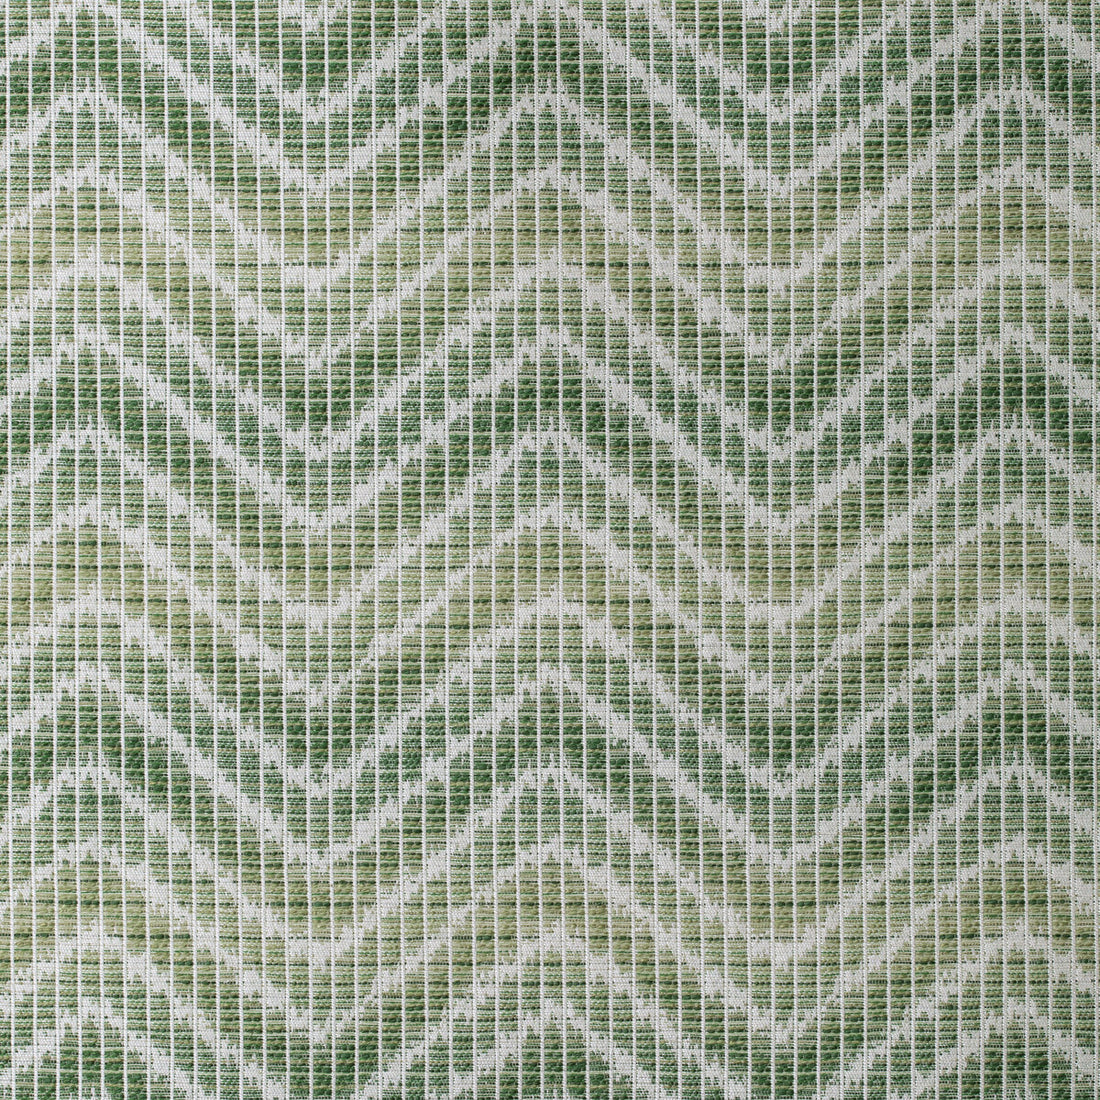 Chausey Woven fabric in leaf color - pattern 8020106.3.0 - by Brunschwig &amp; Fils